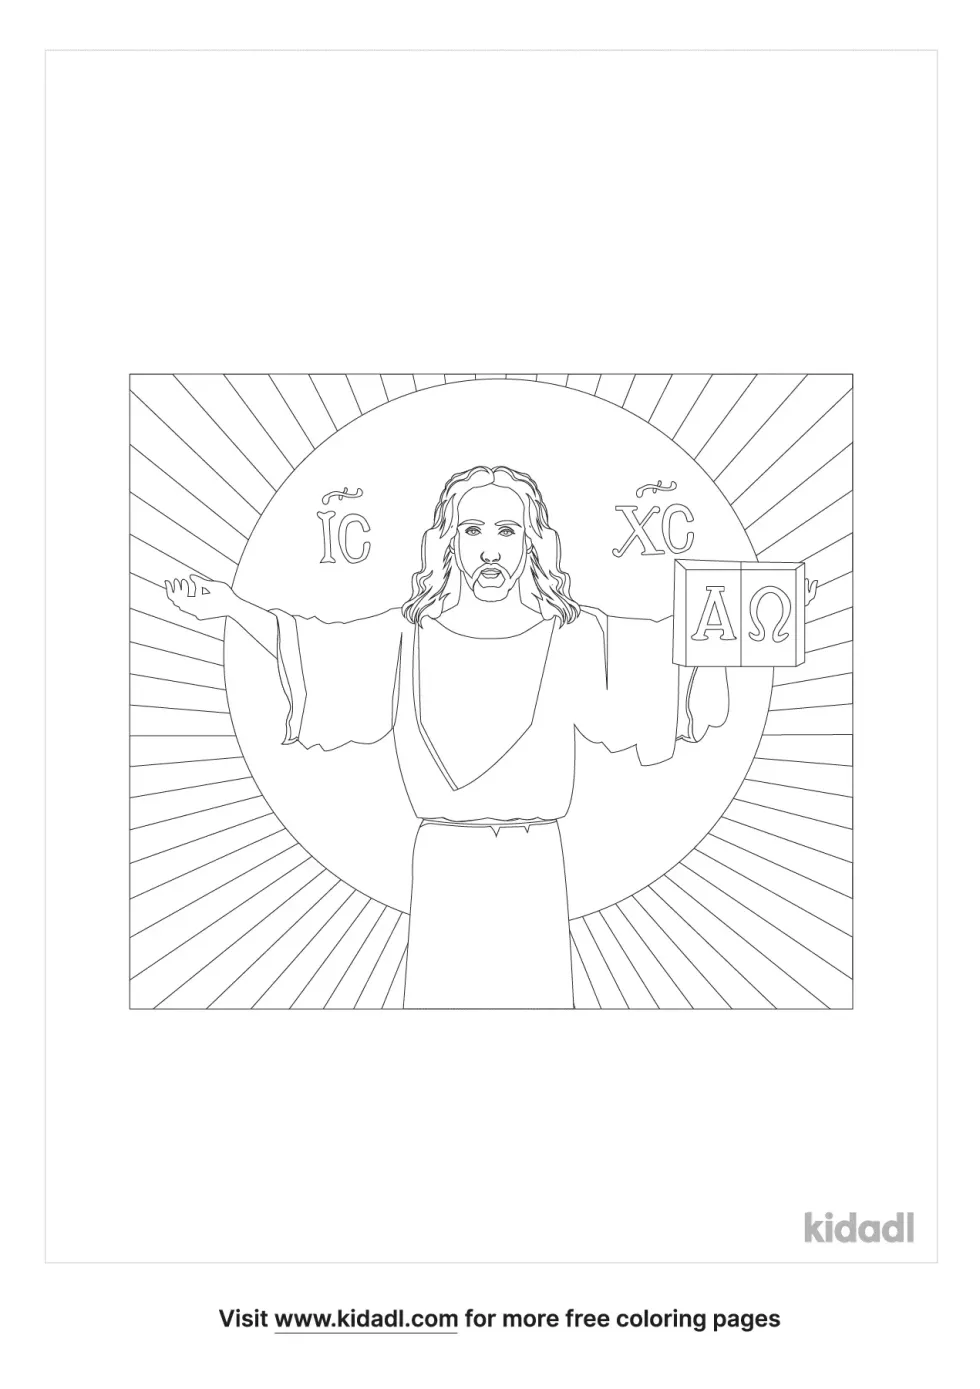 Pantocrator Coloring Page